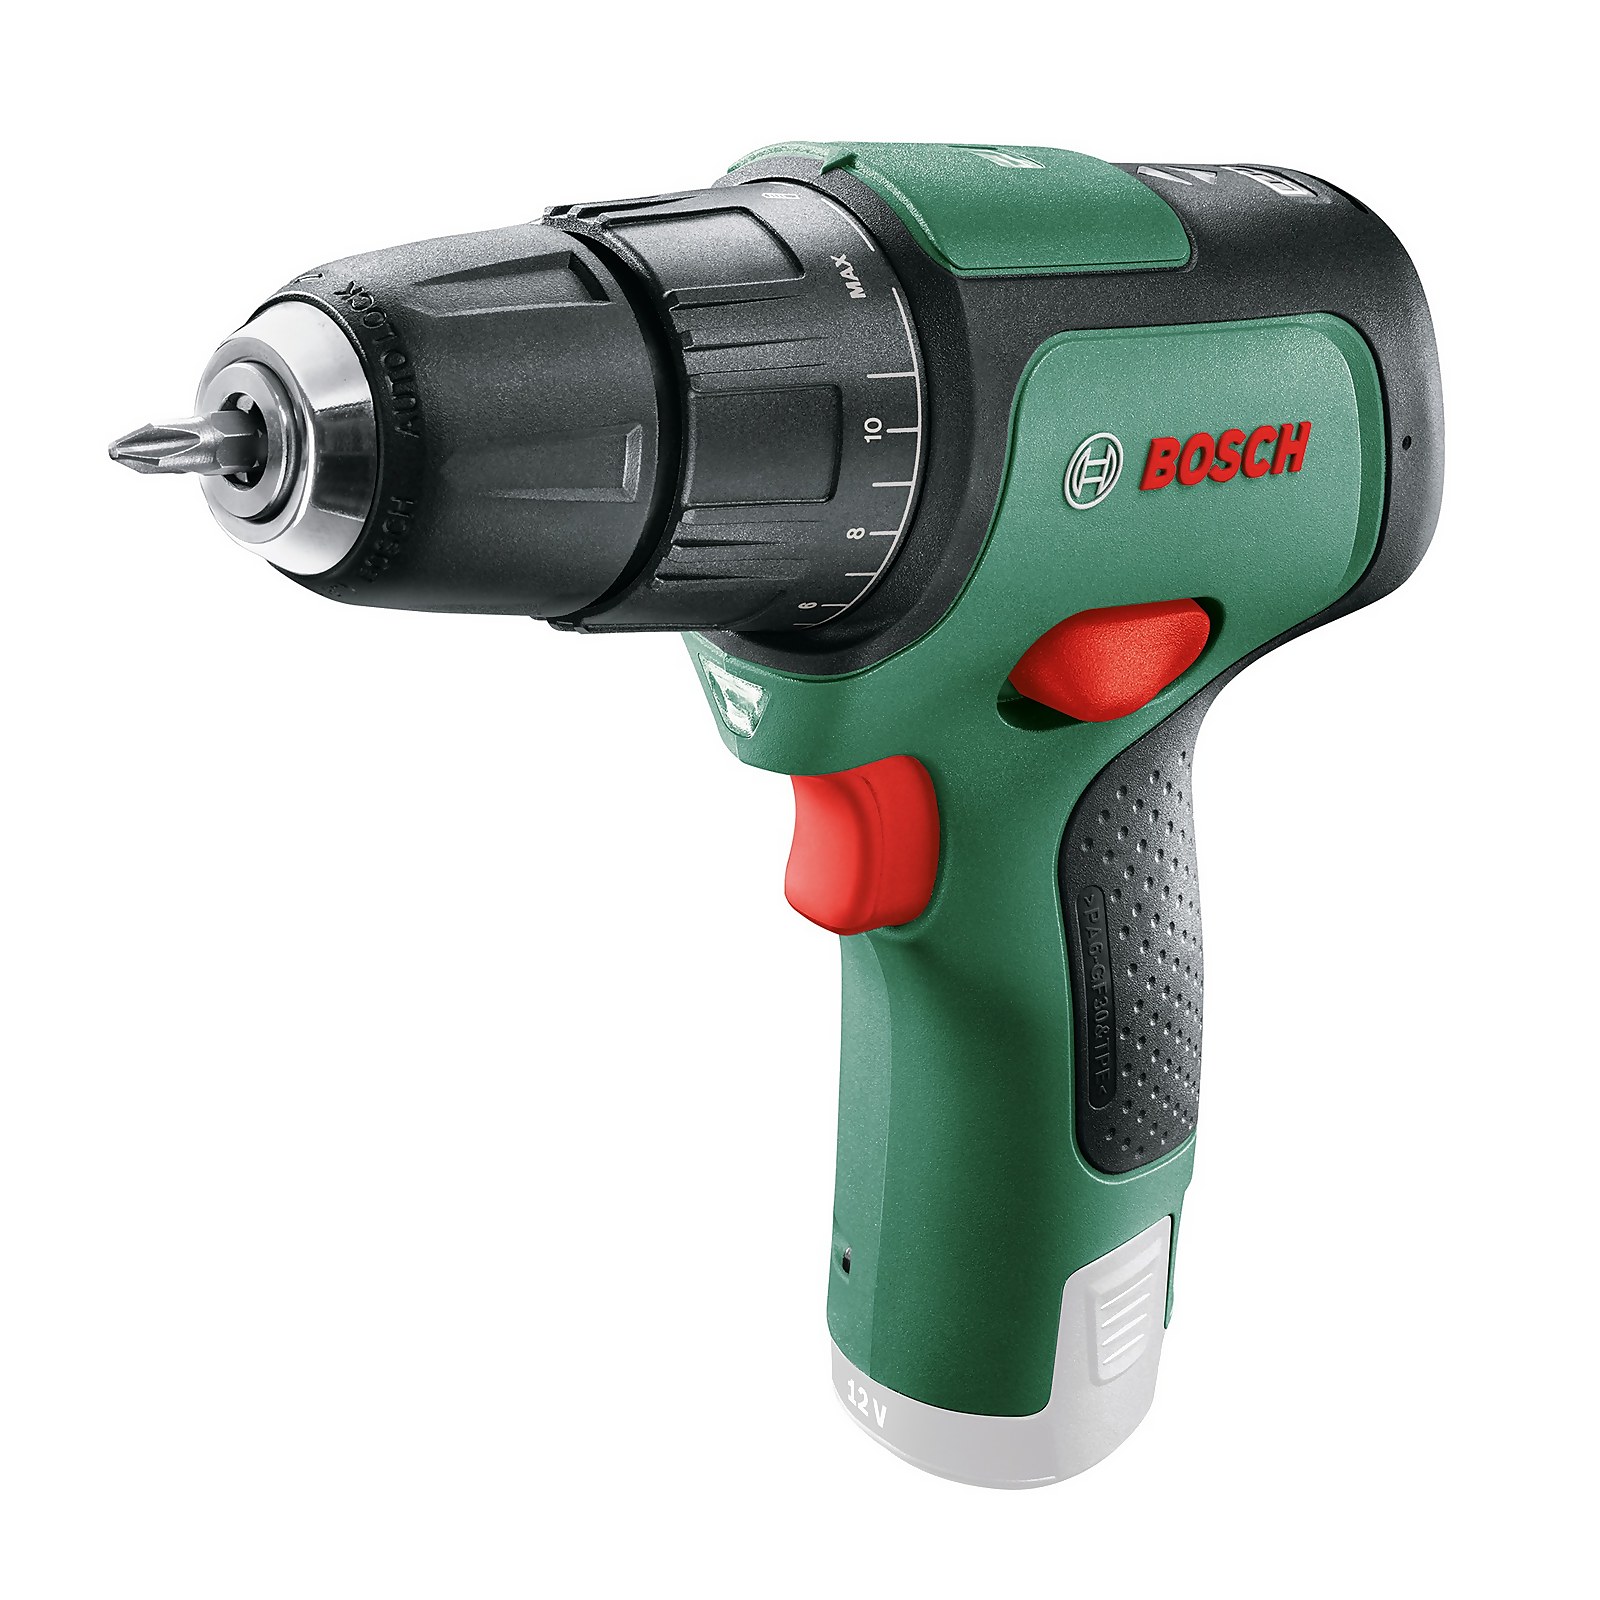 Photo of Bosch Easyimpact 12 Combi Drill -no Battery Included-